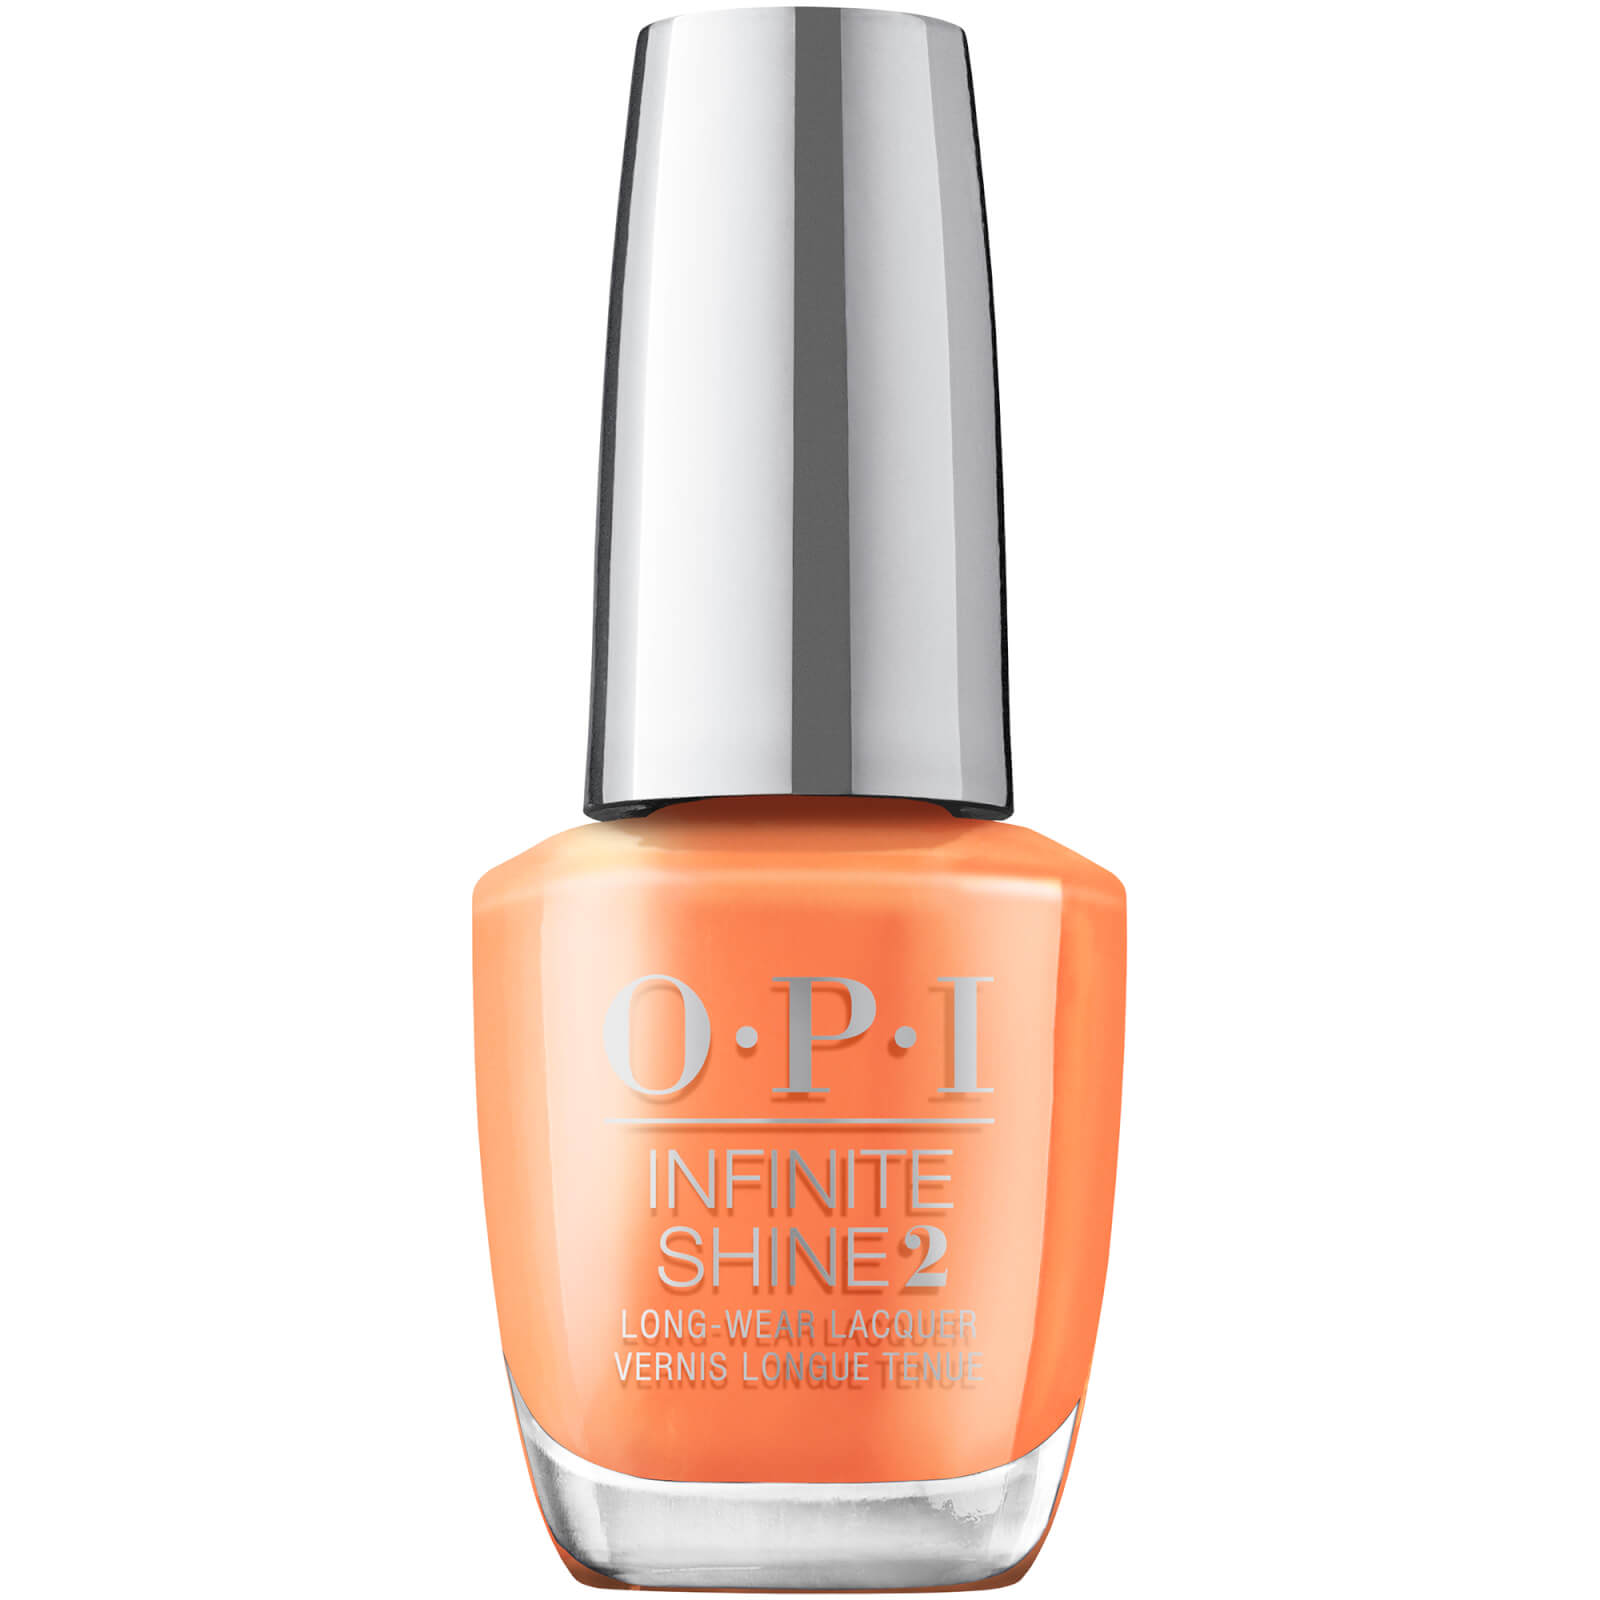 Opi Me, Myself And  Infinite Shine Long-wear Nail Polish 15ml (various Shades) - Silicon Valley Girl In Orange